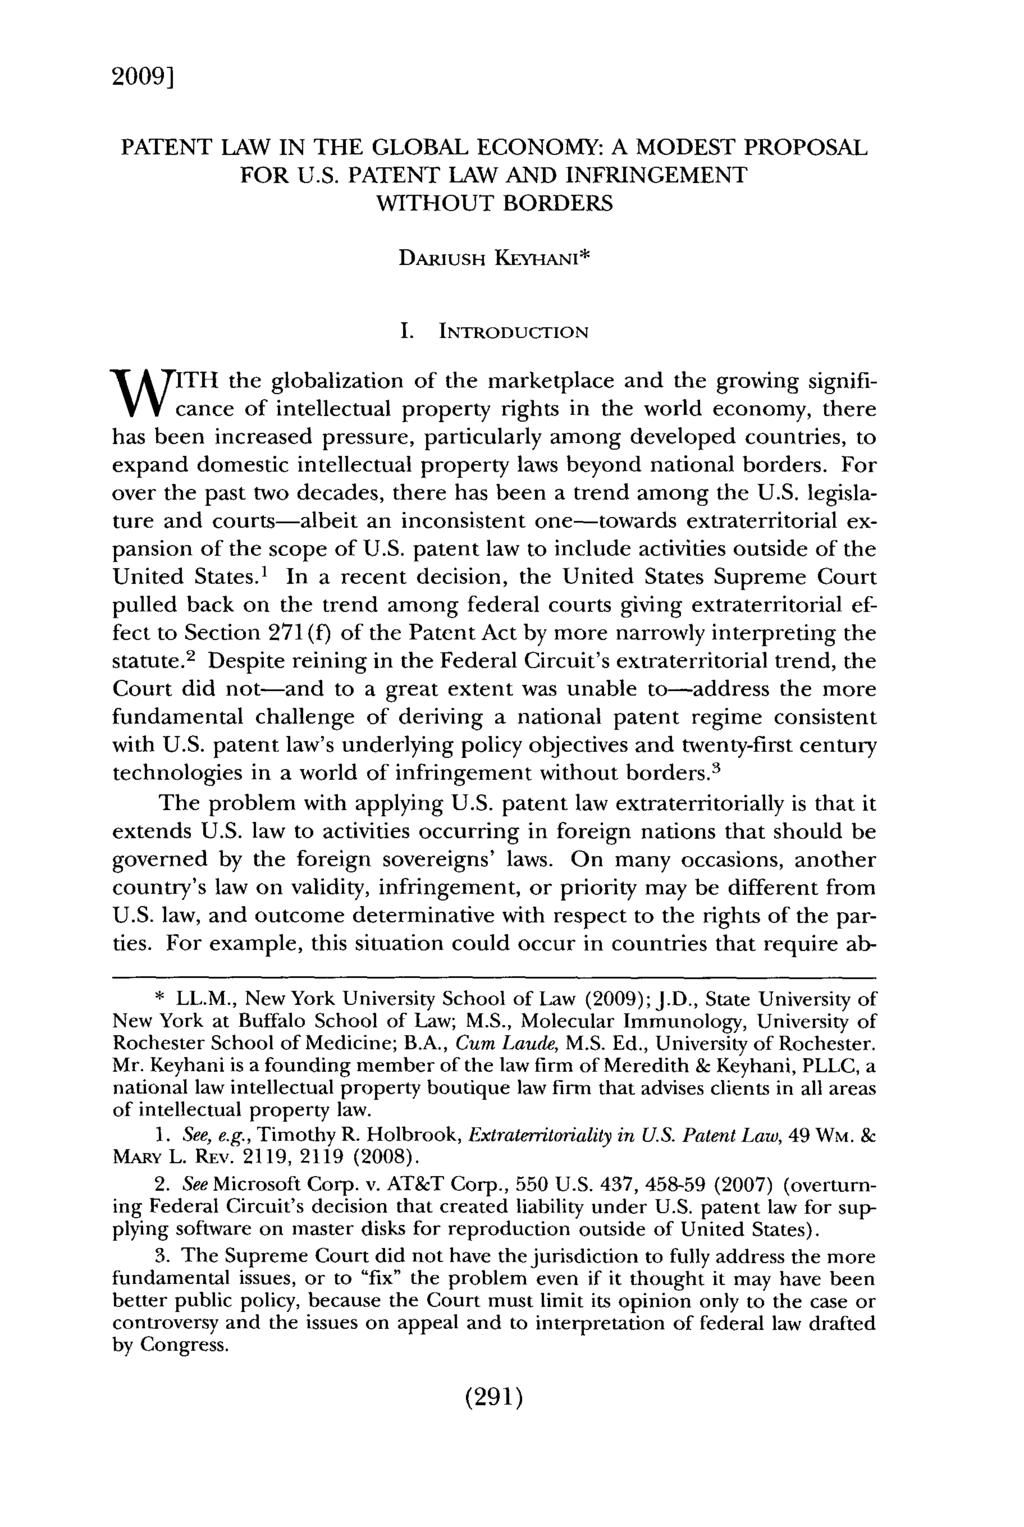 2009] Keyhani: Patent Law in the Global Economy: A Modest Proposal for U.S. Pate PATENT LAW IN THE GLOBAL ECONOMY: A MODEST PROPOSAL FOR U.S. PATENT LAW AND INFRINGEMENT WITHOUT BORDERS DARIUSH KEYHANI* W I.